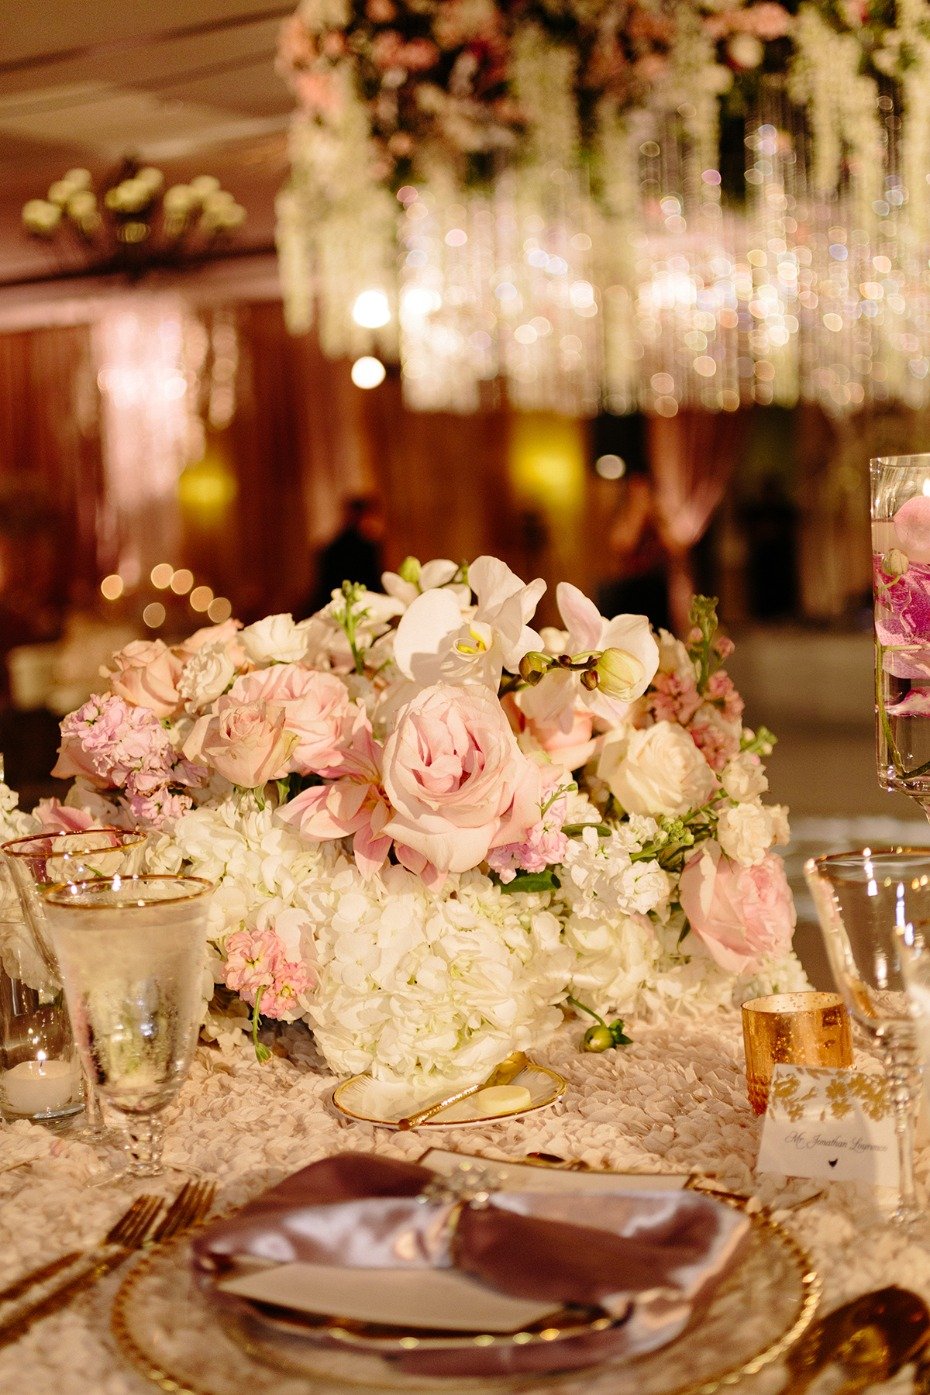 Glamorous reception decor in blush and gold